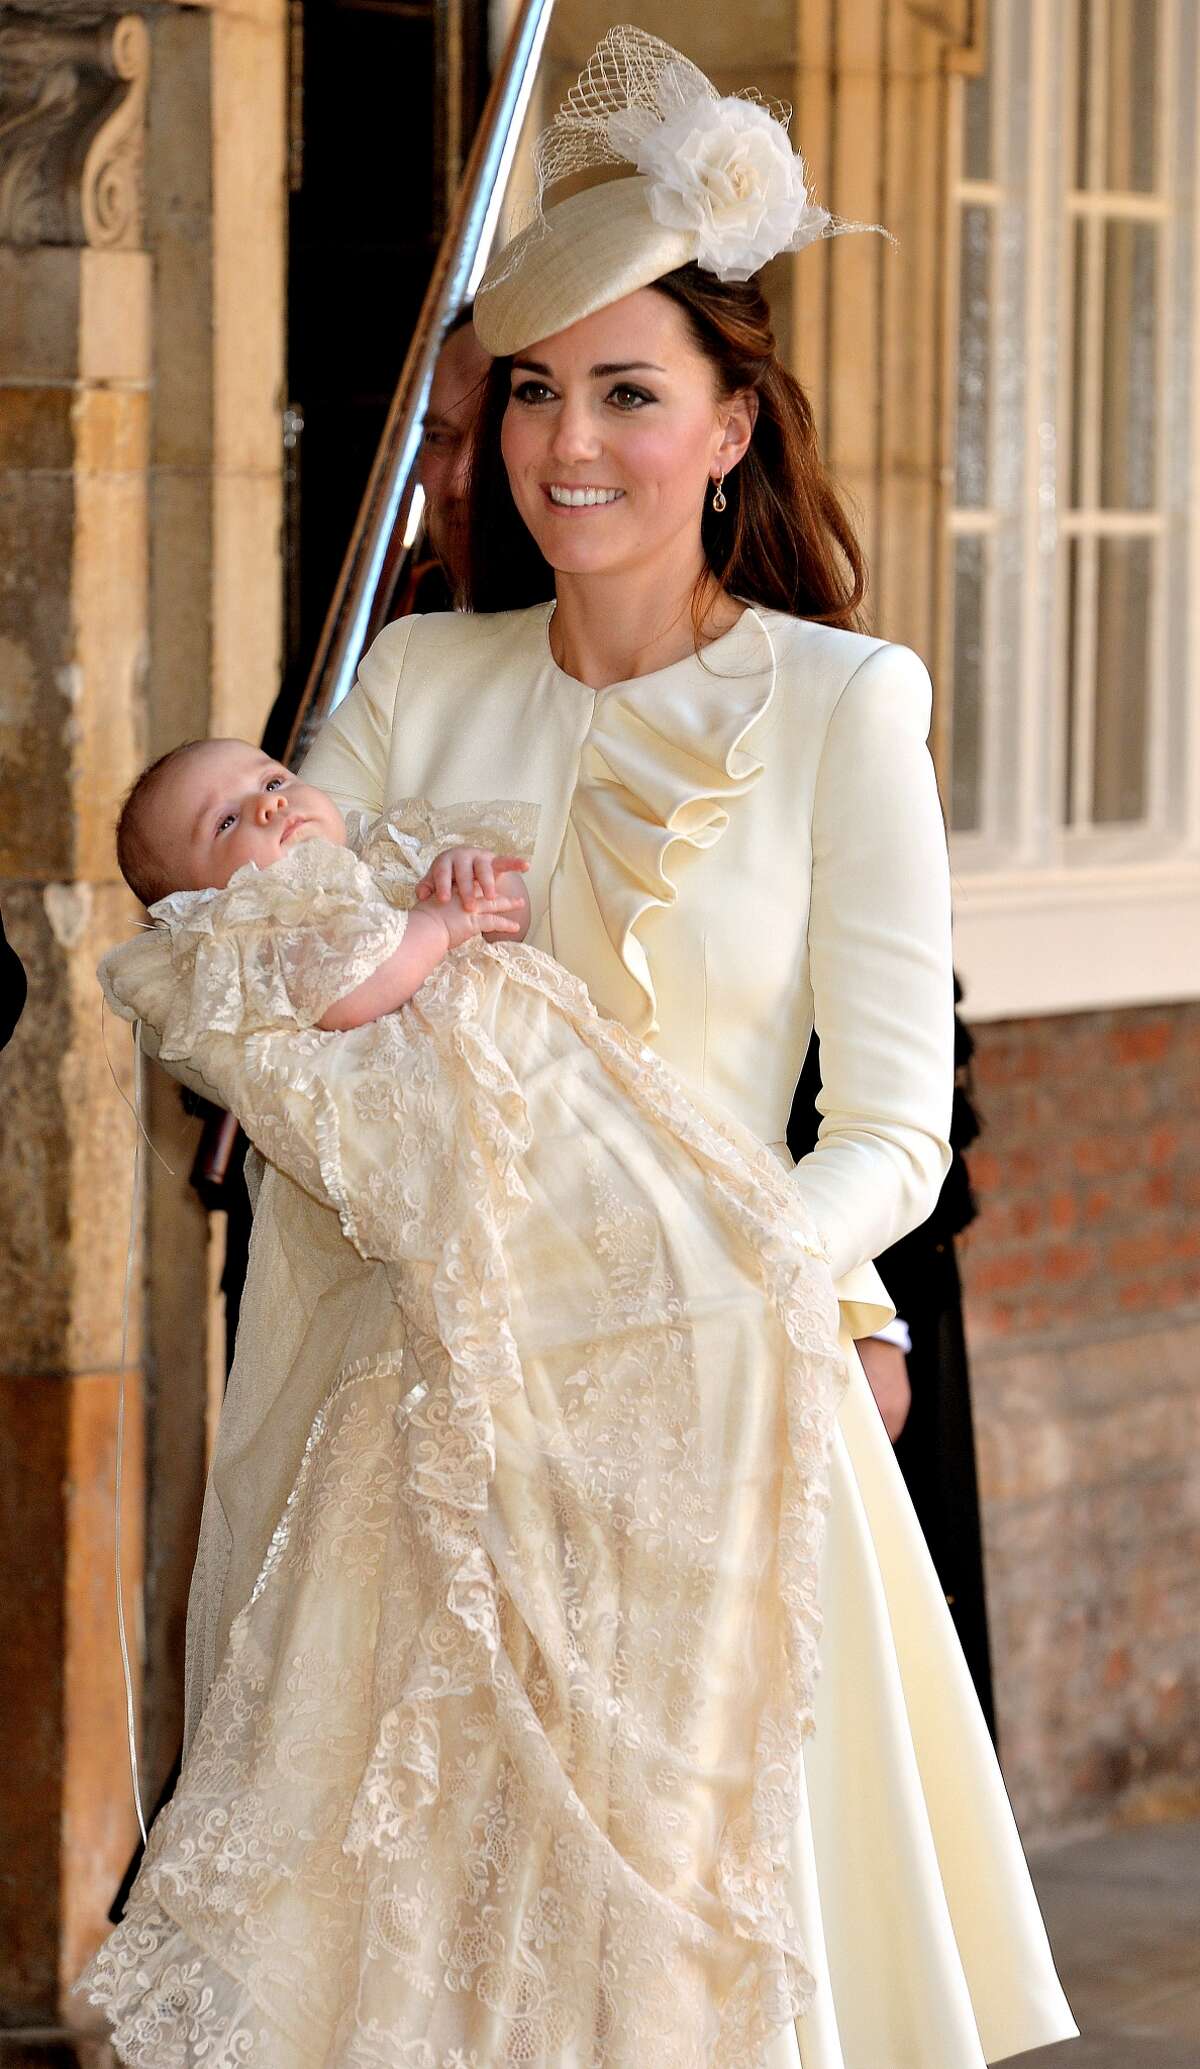 Kate Middleton and the christening of her son.